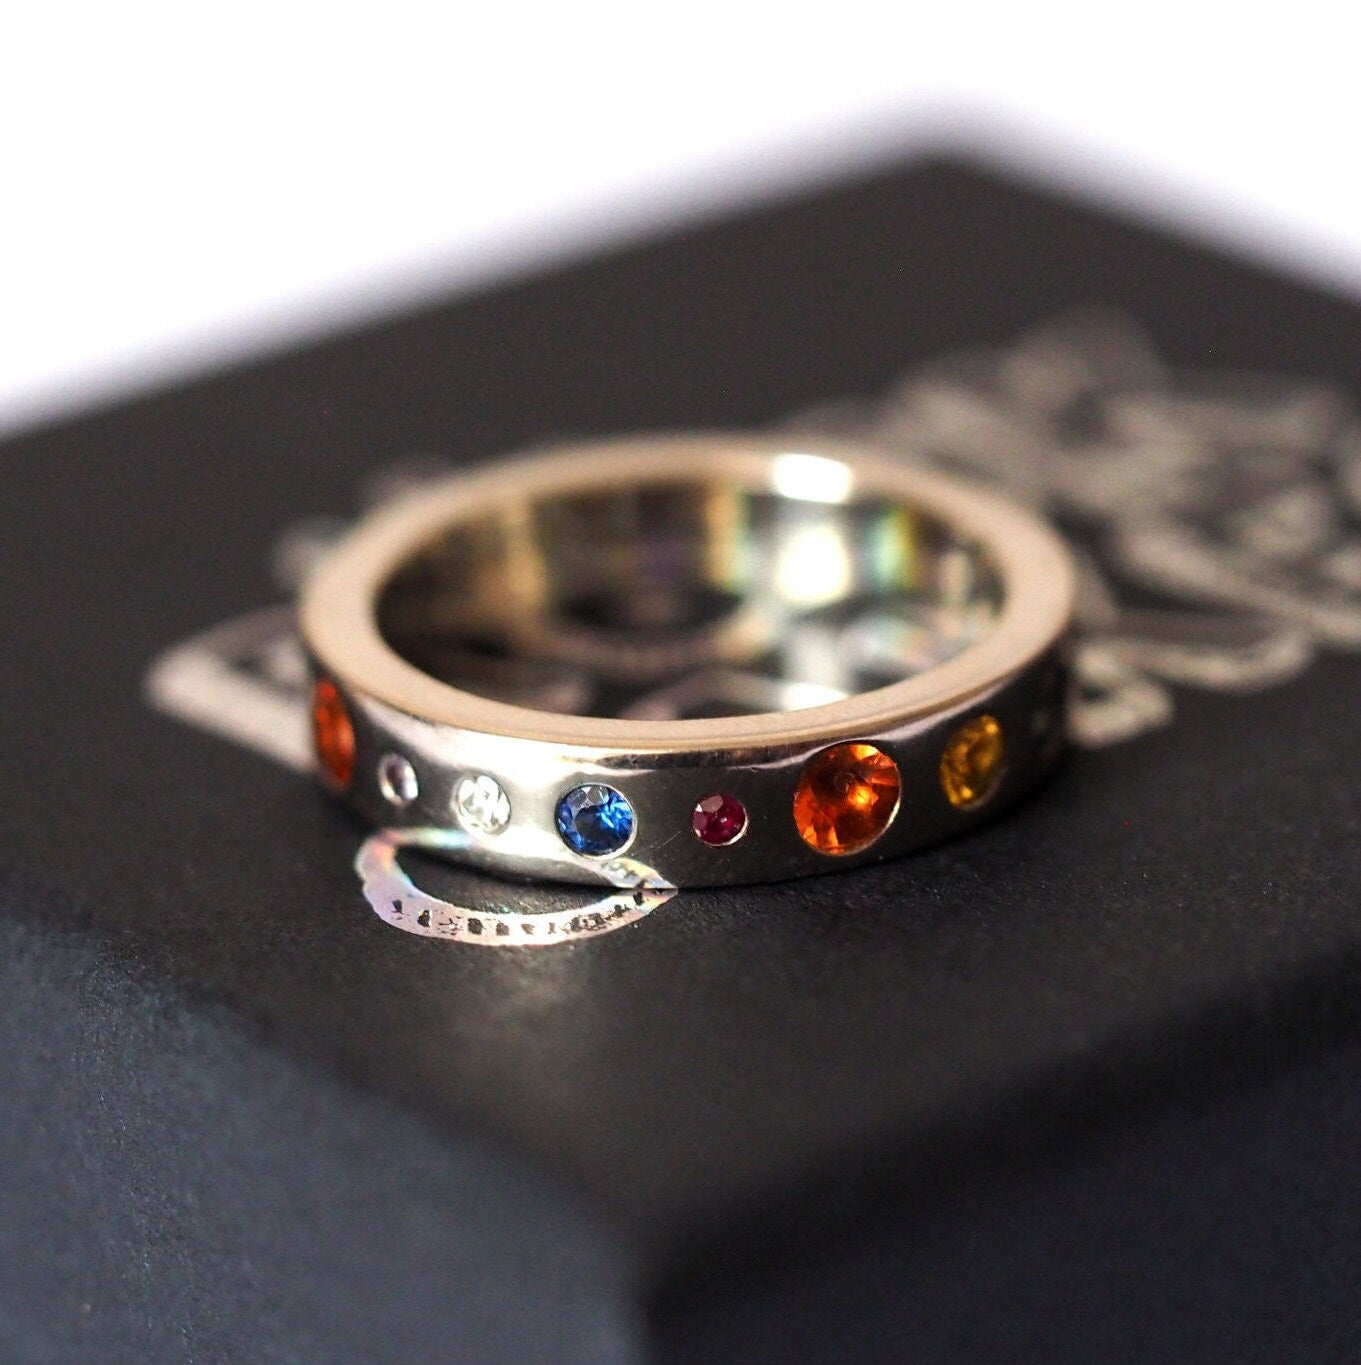 Planet Ring - Recycled Sterling Silver and Precious Stones